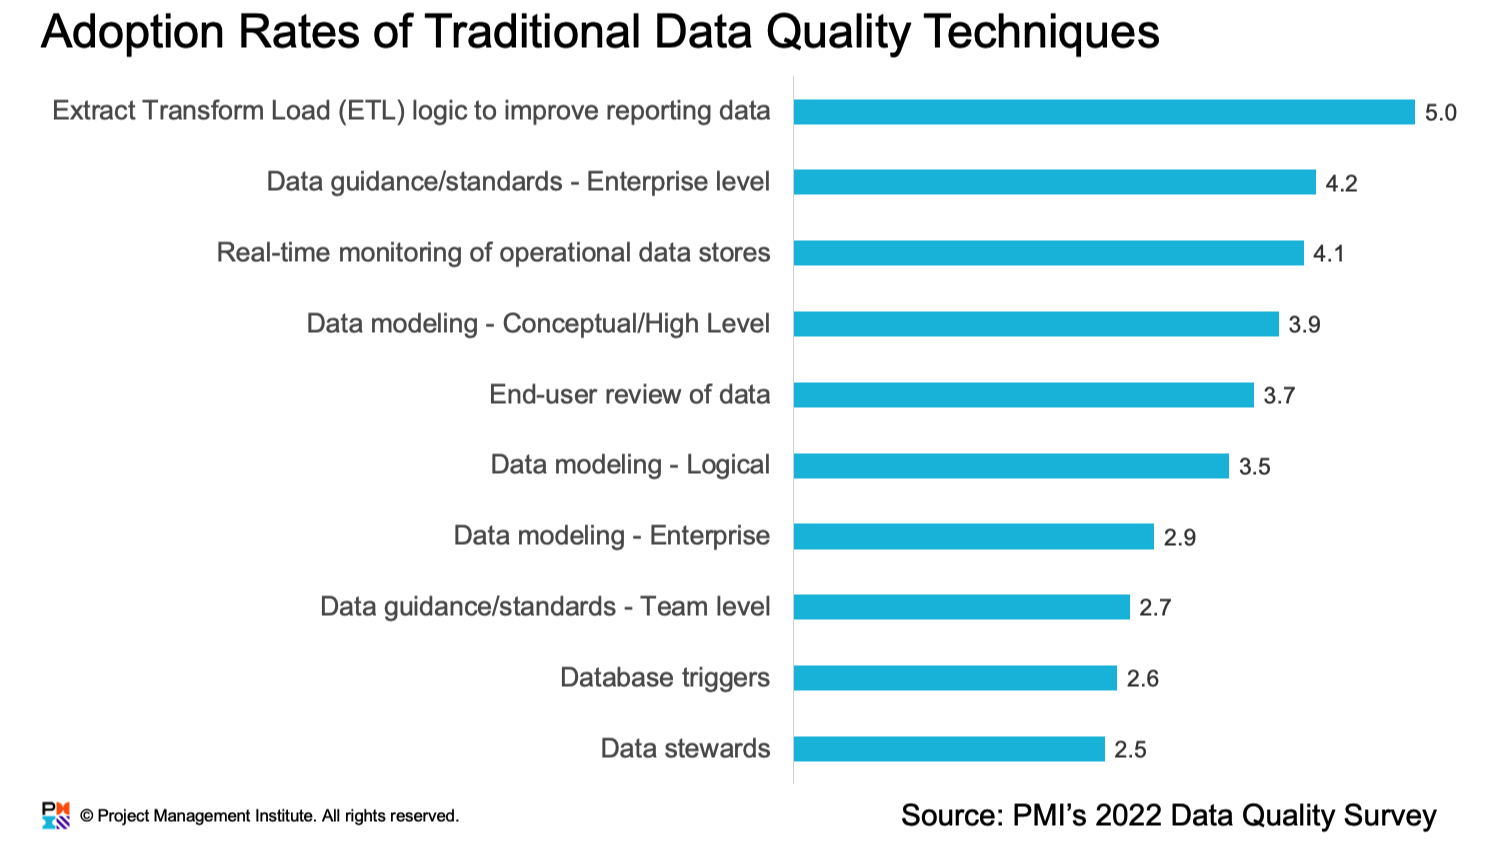 Adoption rate of traditional data quality techniques